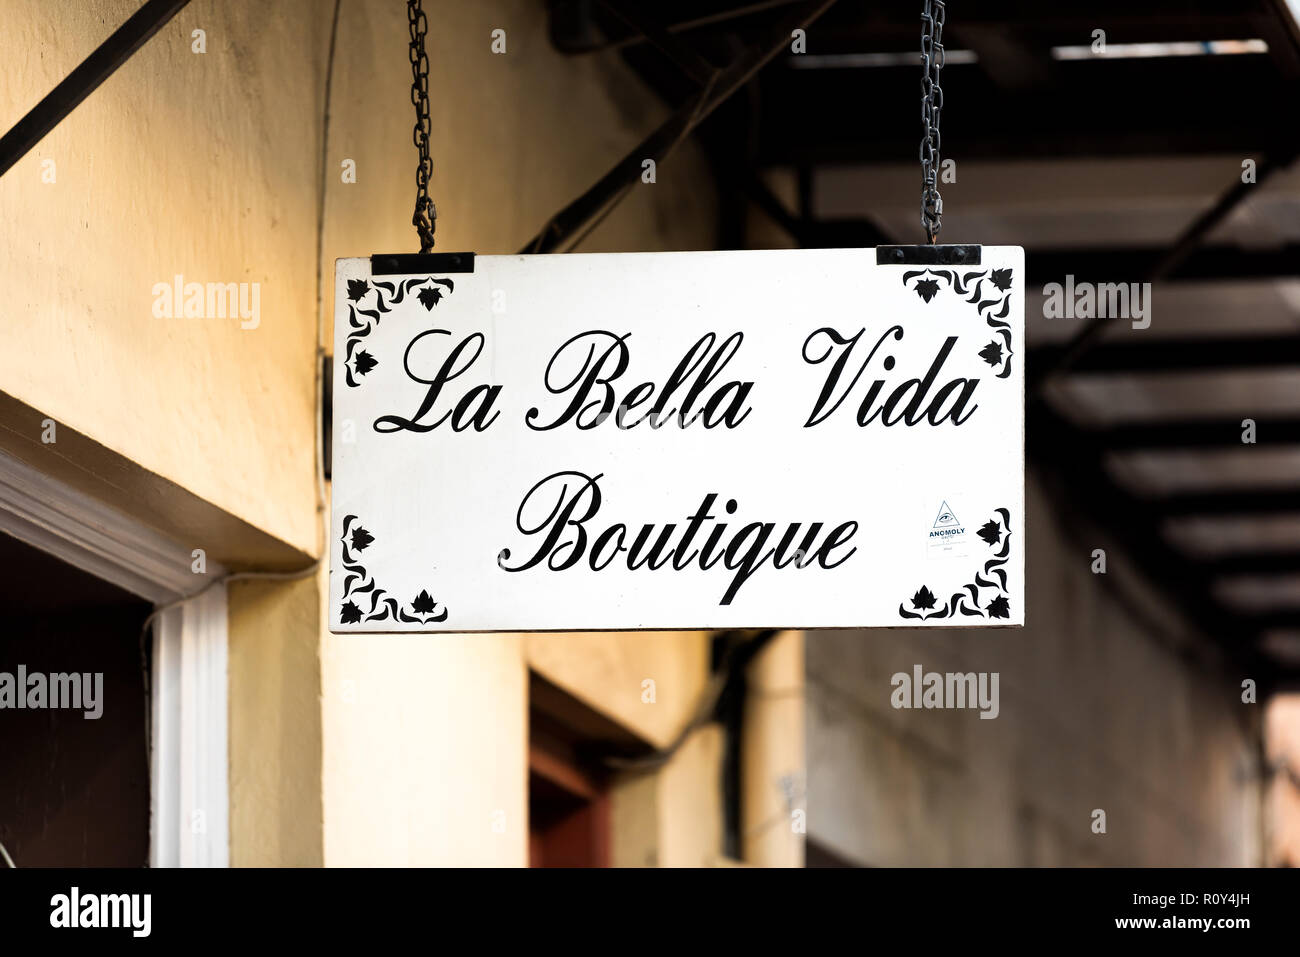 New Orleans, USA - April 22, 2018: Downtown old Decatur street in Louisiana famous town, city, shopping boutique sign for La Bella Vida, nobody Stock Photo